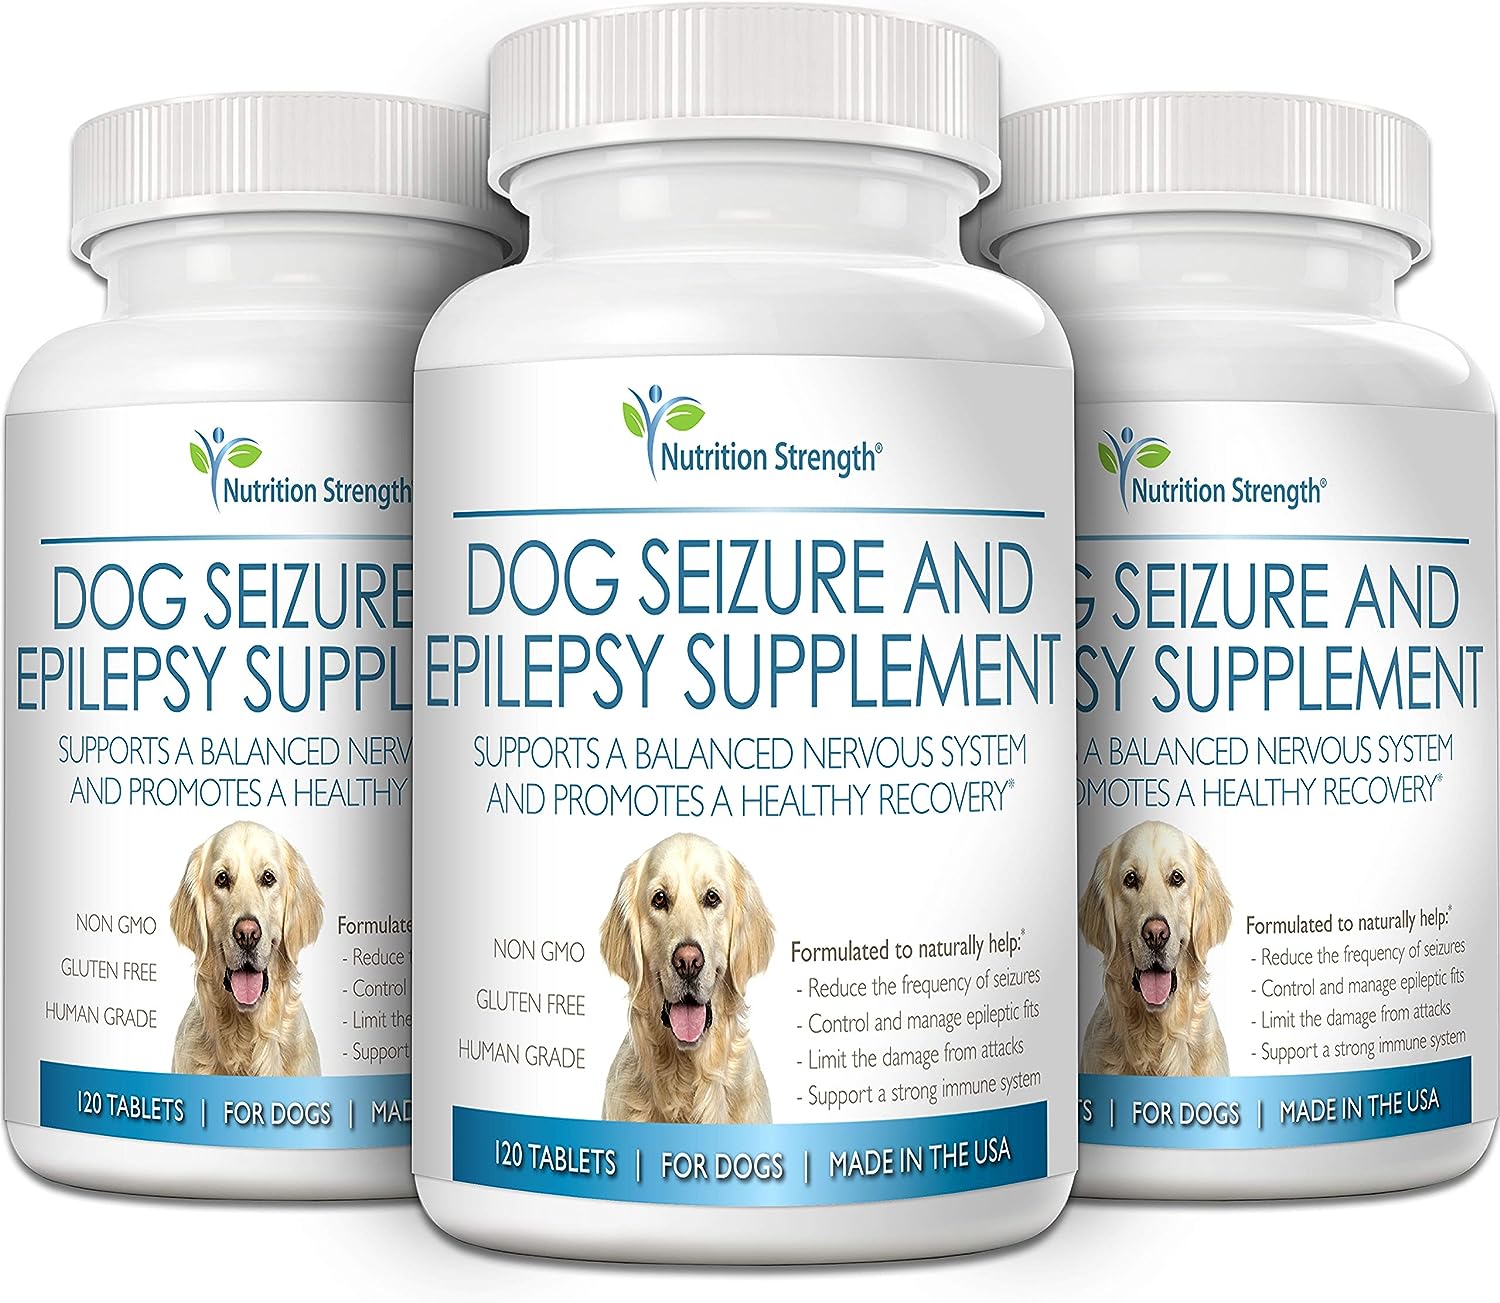 Nutrition Strength Dog Seizure Support, Supplement for Epilepsy in Dogs, with Organic Valerian Root, Chamomile and Blue Vervain, Plus L-Tryptophan Dog Stress and Anxiety Aid, 120 Chewable Tablets : Pet Supplies